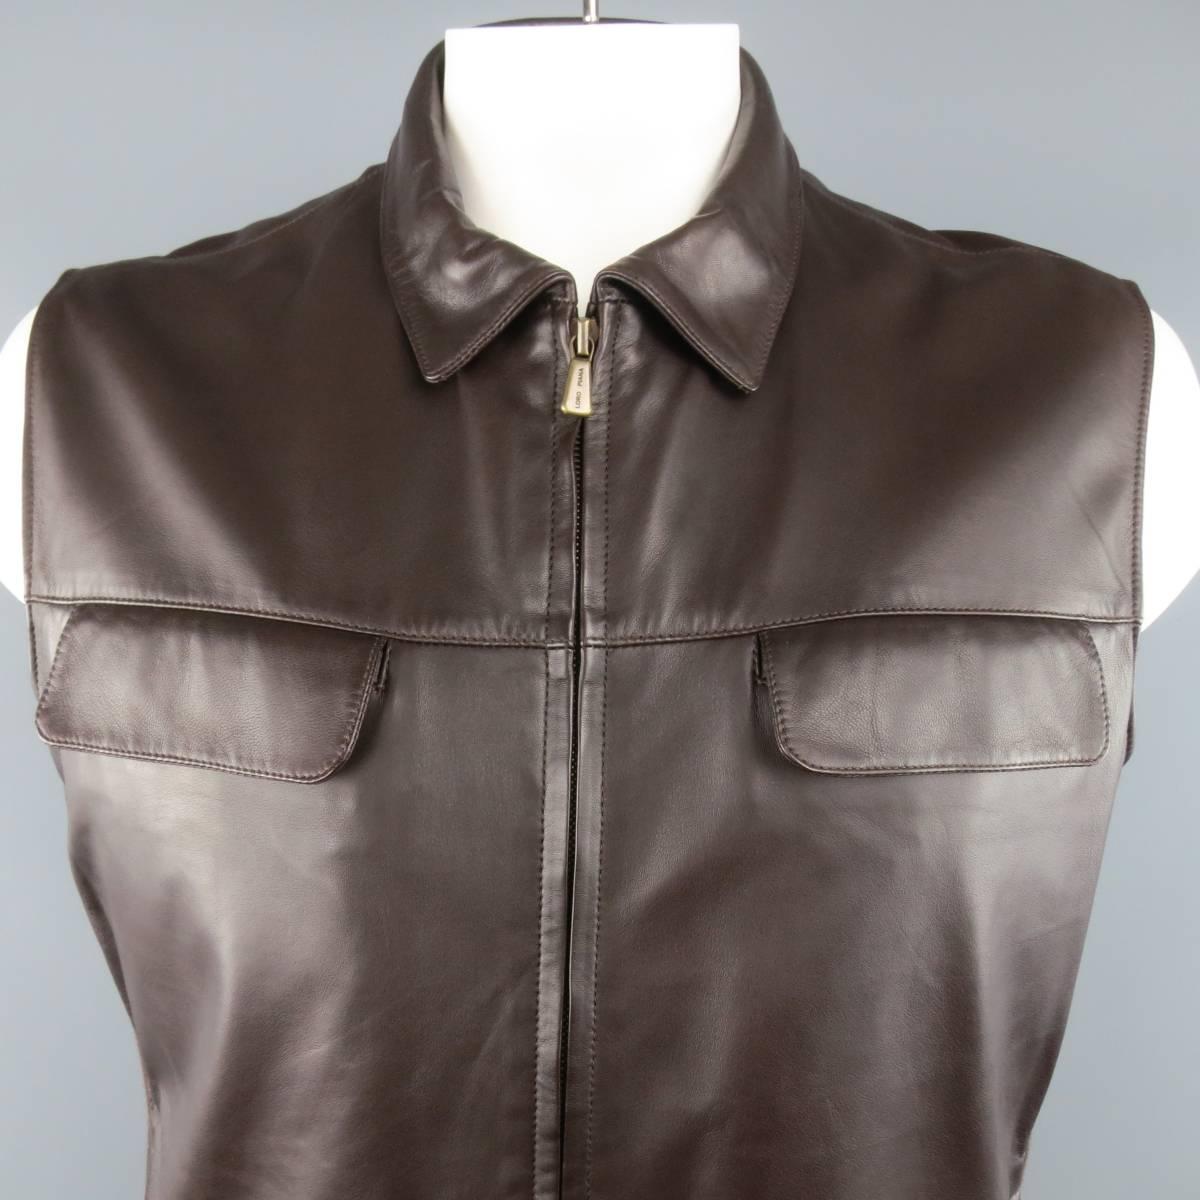 LORO PIANA vest comes in rich chocolate brown smooth leather and features a pointed collar, dark gold tone double zip front, double flap chest pockets, slit side pockets, and ribbed knit side panels. Made in Italy.
 
New with Tags.
Marked: XL
